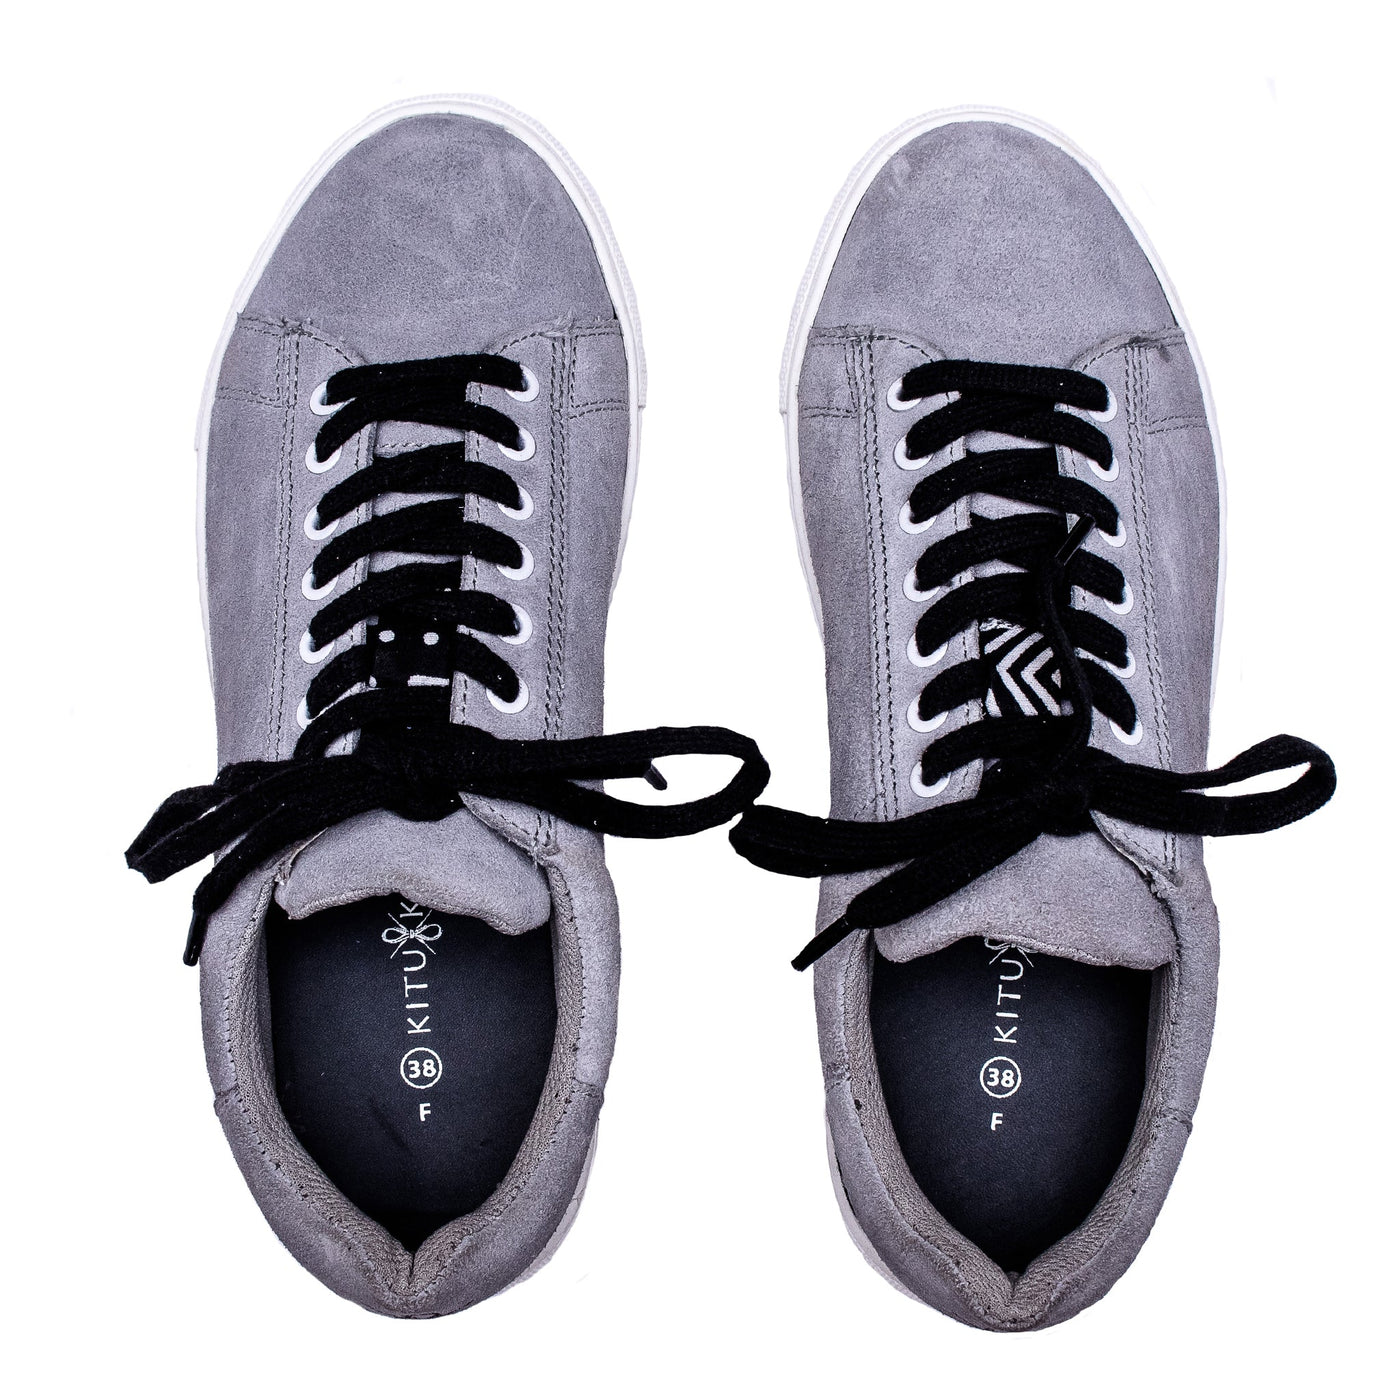 Kali Sneakers: Premium Grey Suede with Tandao